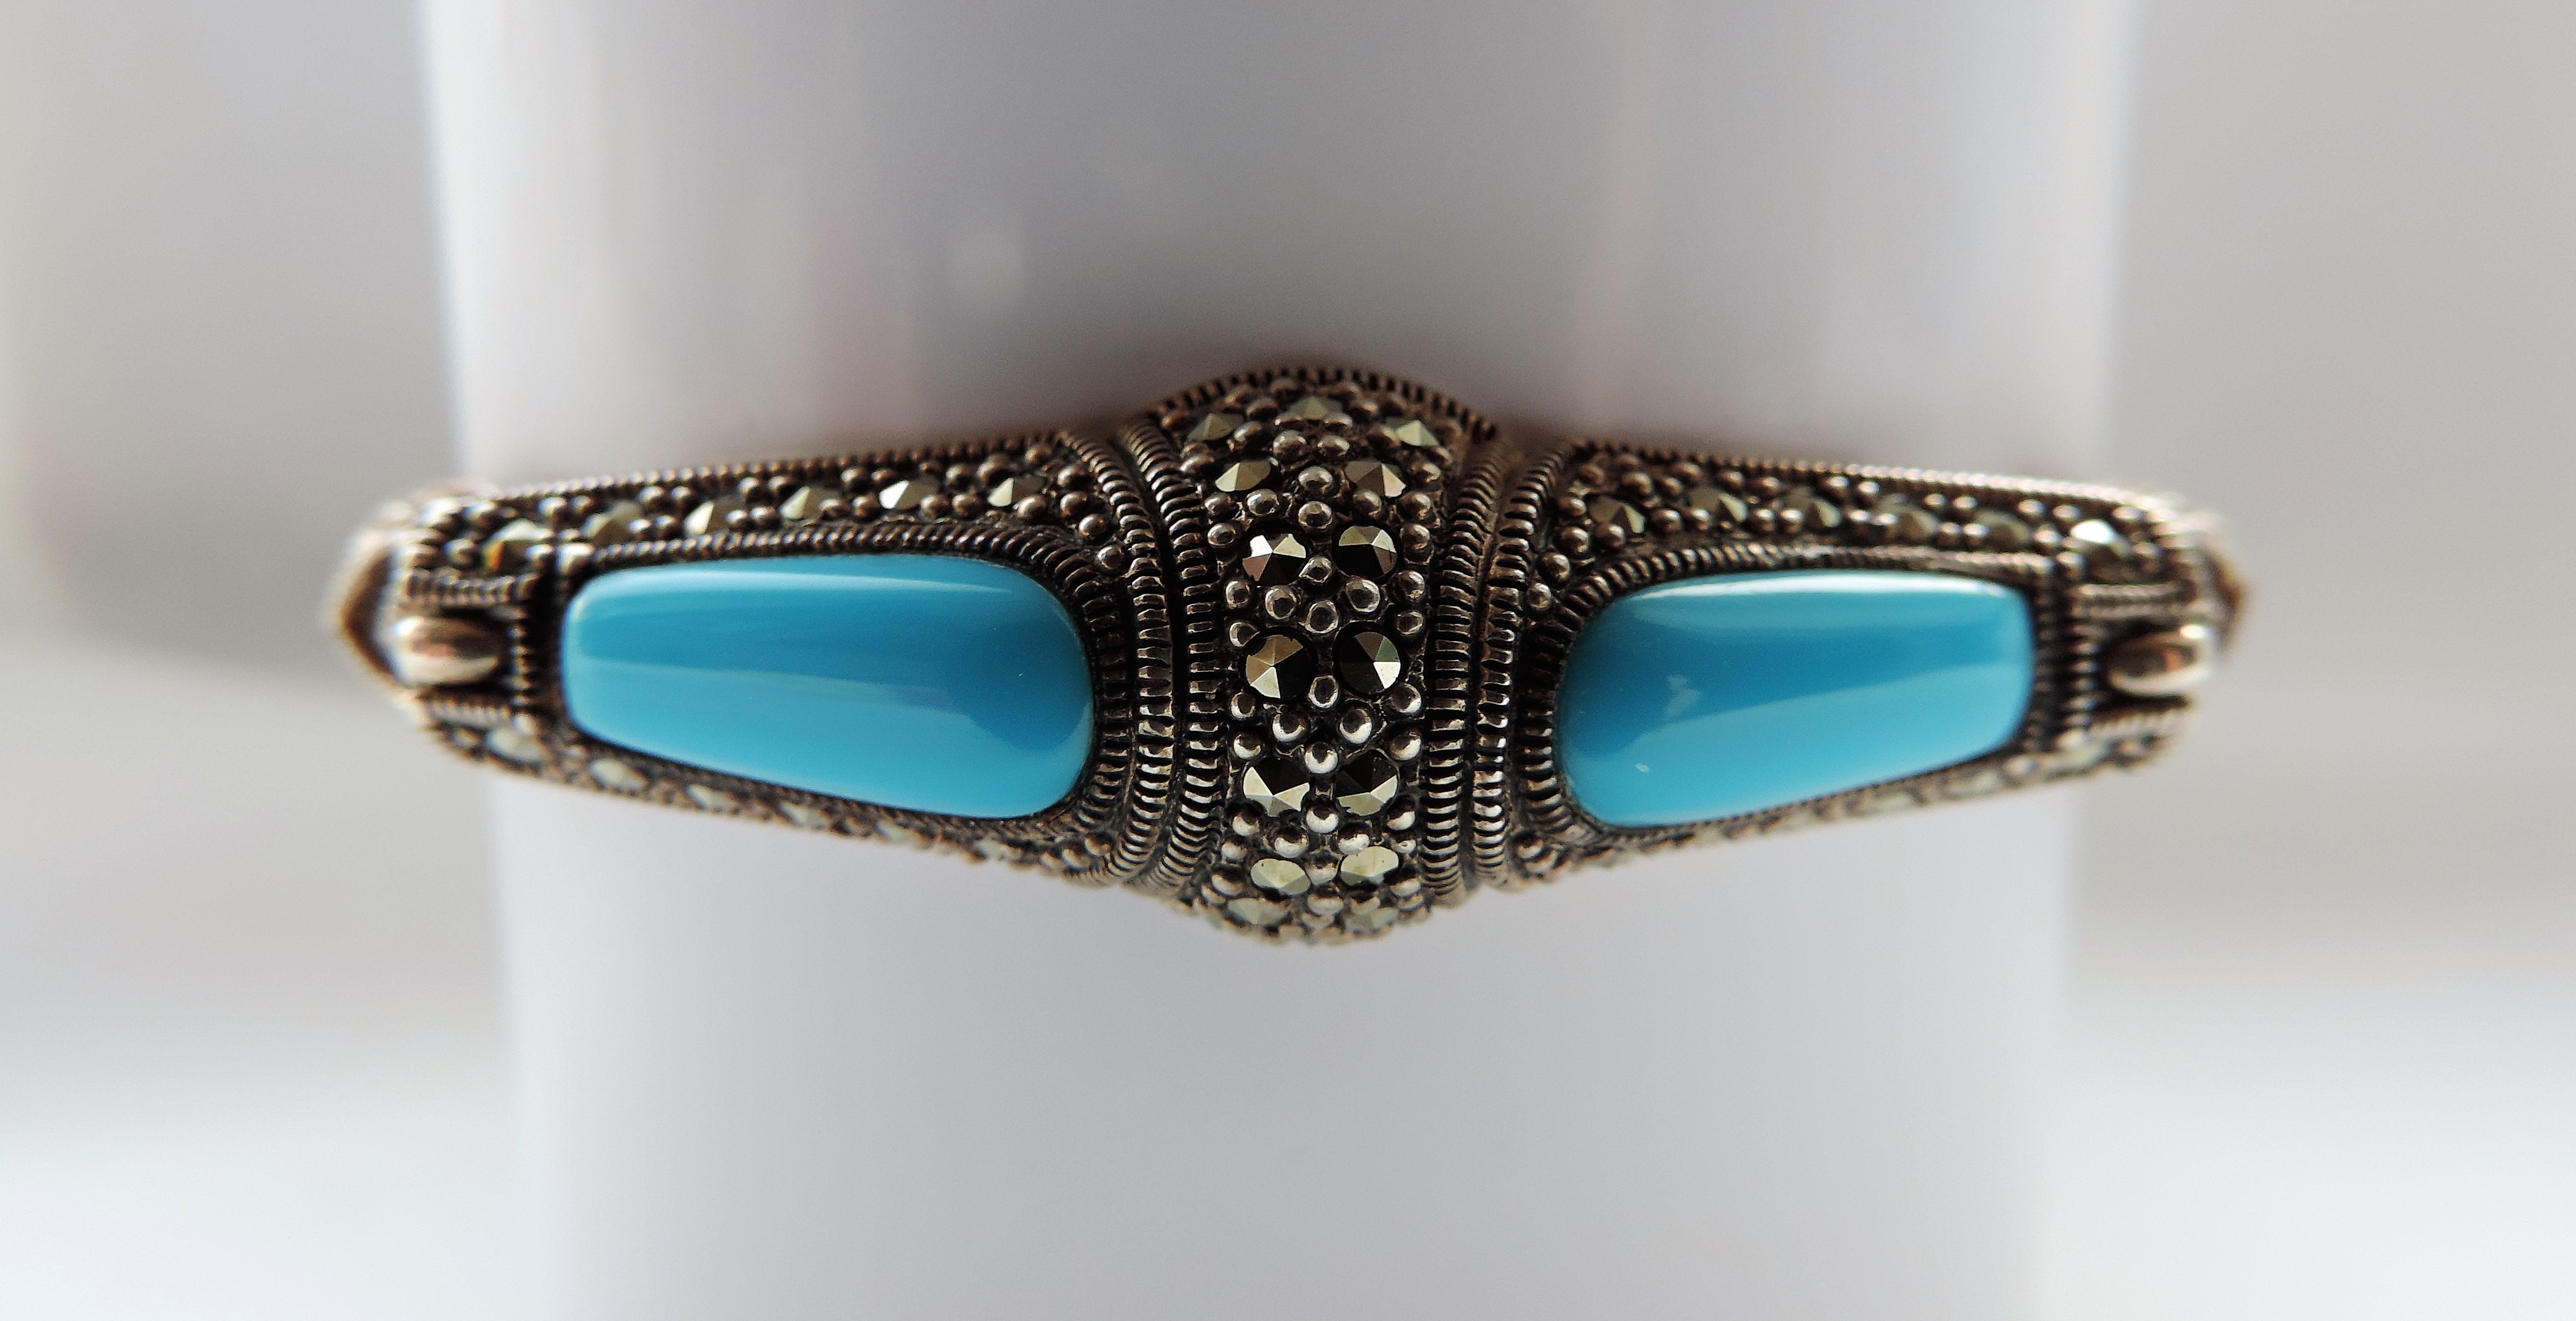 Silver And Turquoise Bracelet 13.3 Grams - Image 2 of 4